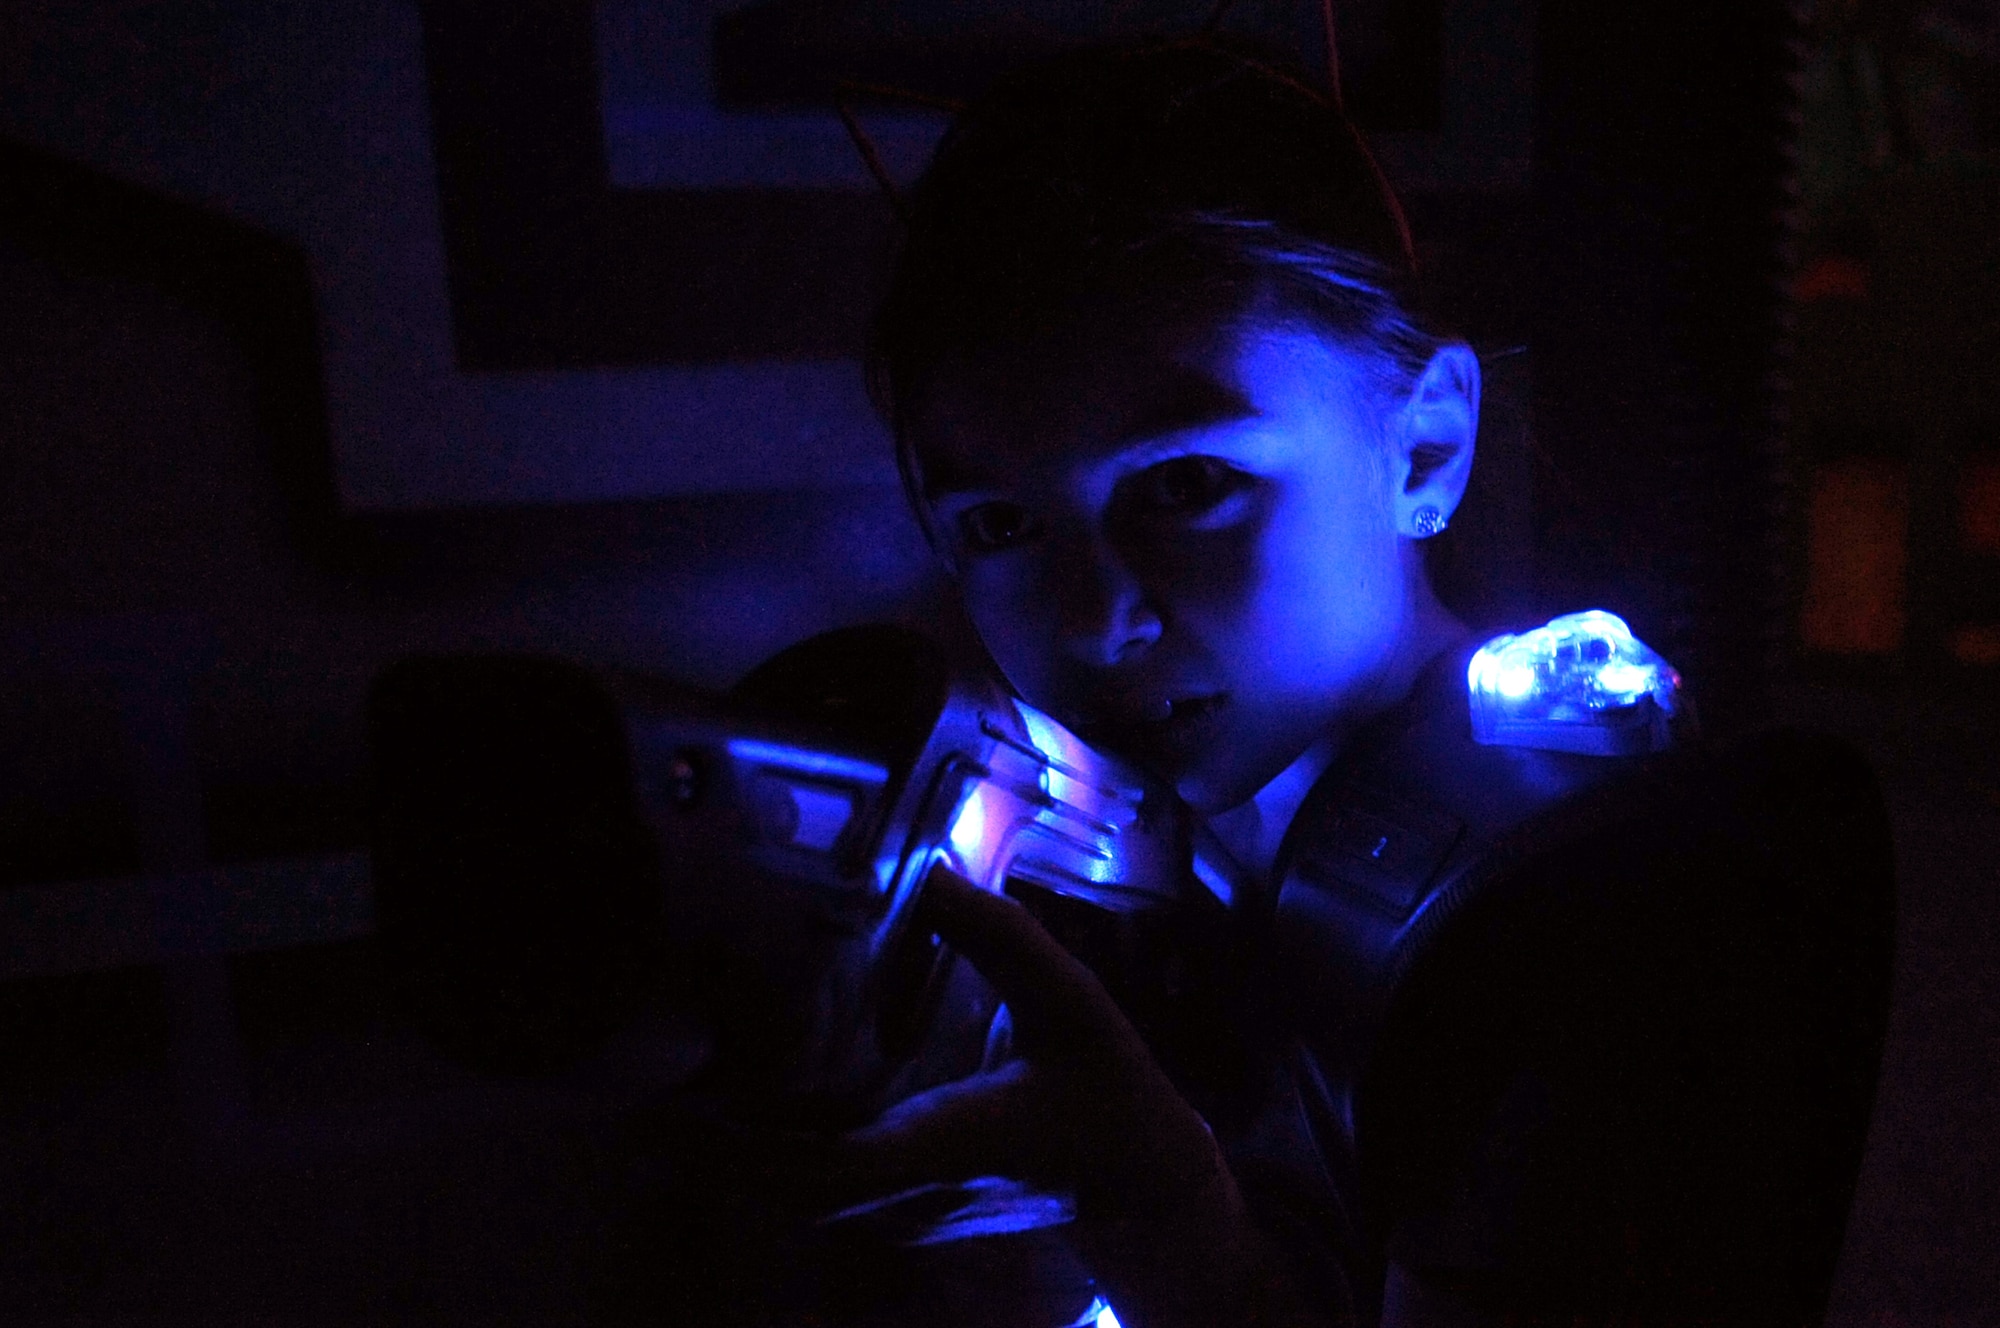 Joei Hager, 8, plays laser tag with other children from Grand Forks Air Force Base, N.D.,  at Northern Air Family Fun Center in Grand Forks, Feb. 2, 2015. Service members and children from the base were invited to take part in a military appreciation night event that also featured a trampoline park and free pizza and ice cream. (U.S. Air Force photo/Staff Sgt. Susan L. Davis)